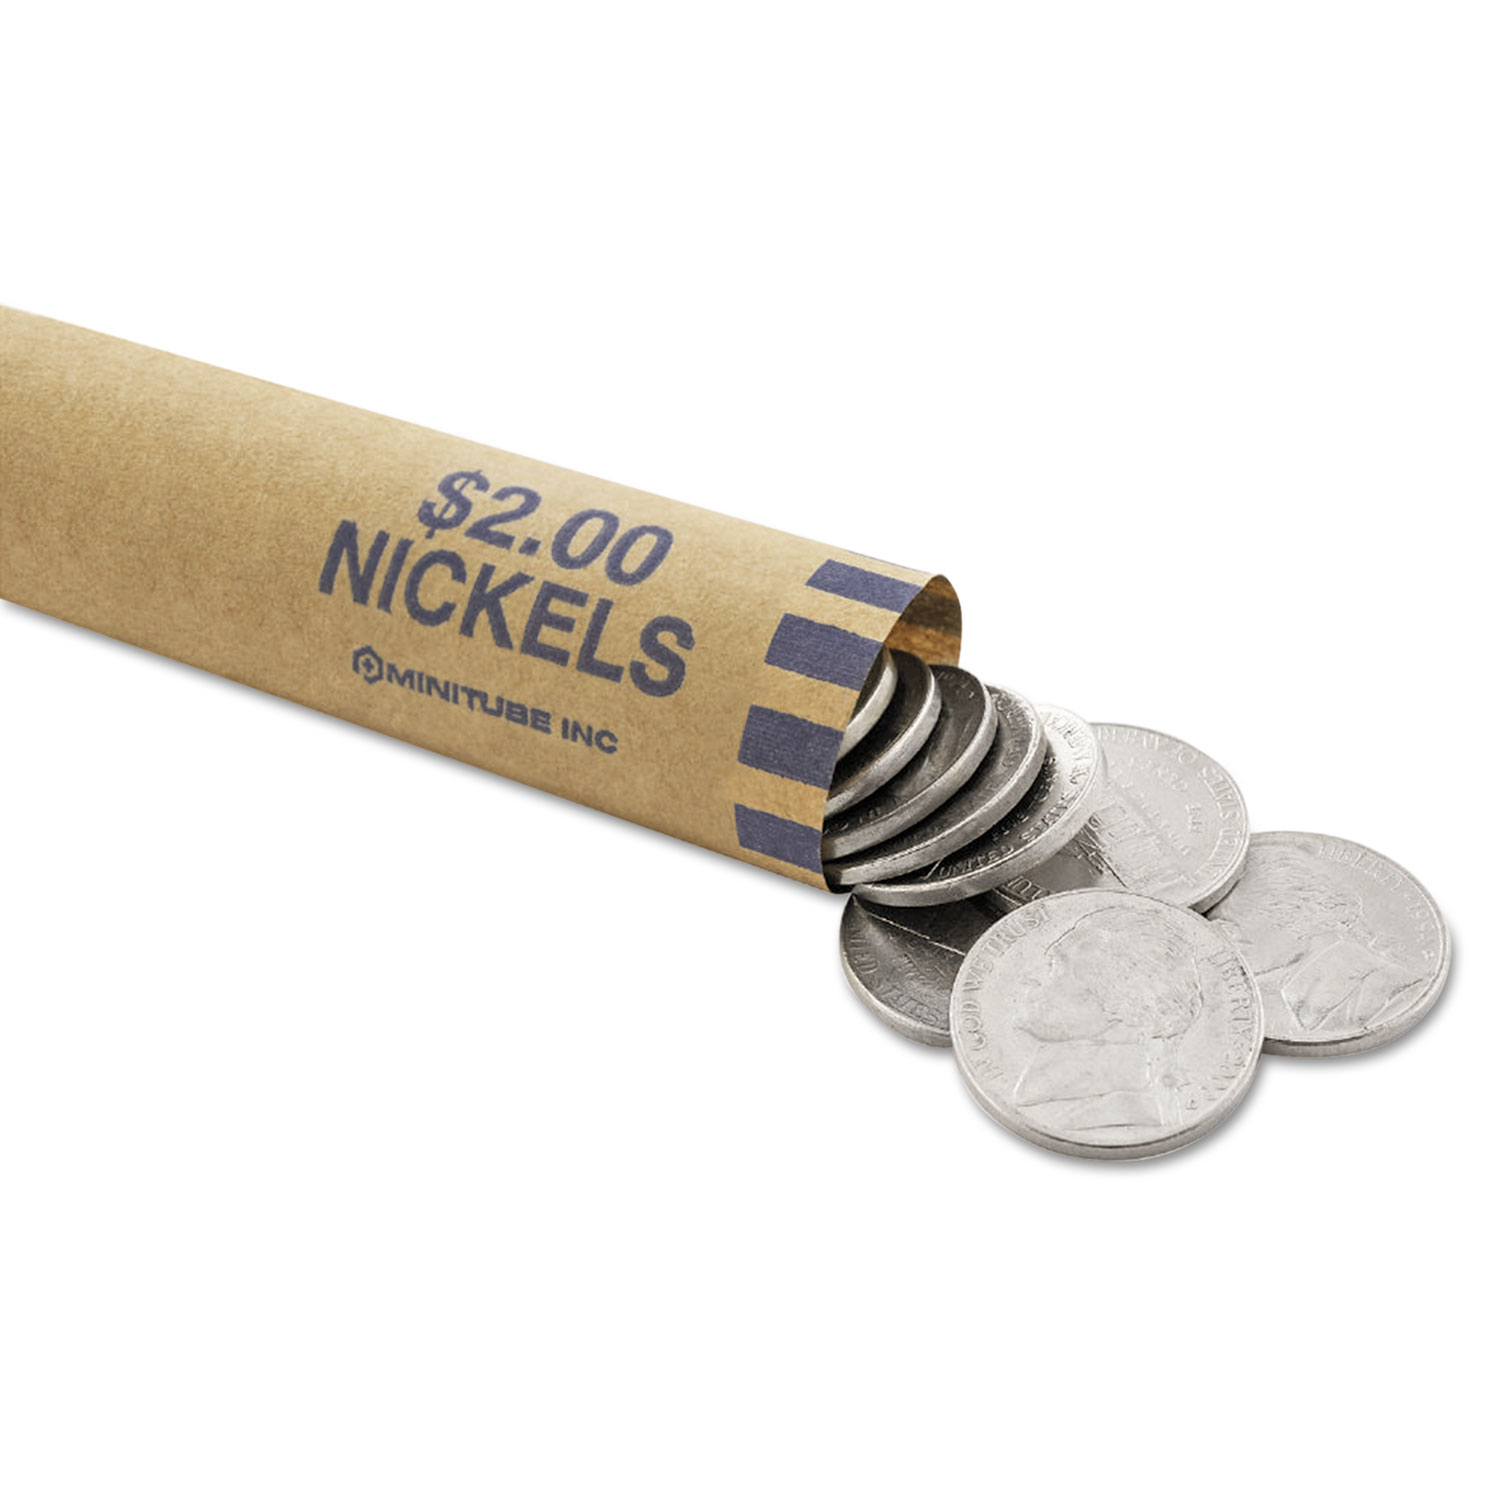  MMF Industries 2160640B08 Nested Preformed Coin Wrappers, Nickels, $2.00, Blue, 1000 Wrappers/Box (MMF2160640B08) 